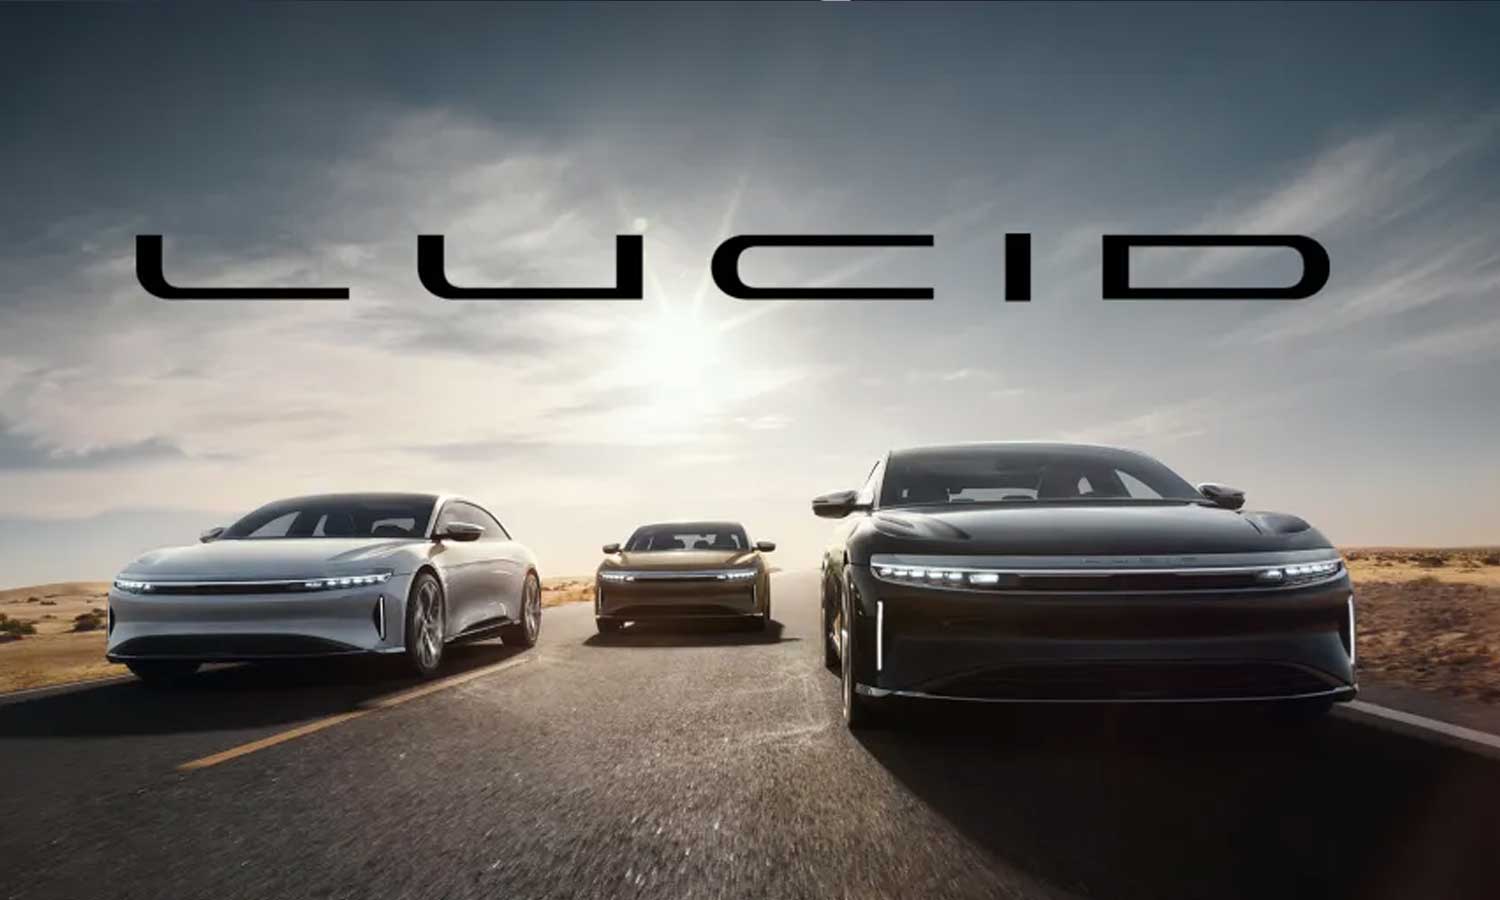 Lucid Motors’ International EV Factory in Saudi Arabia: AMO-2 Begins Operations with Plans for Full Capacity by 2028